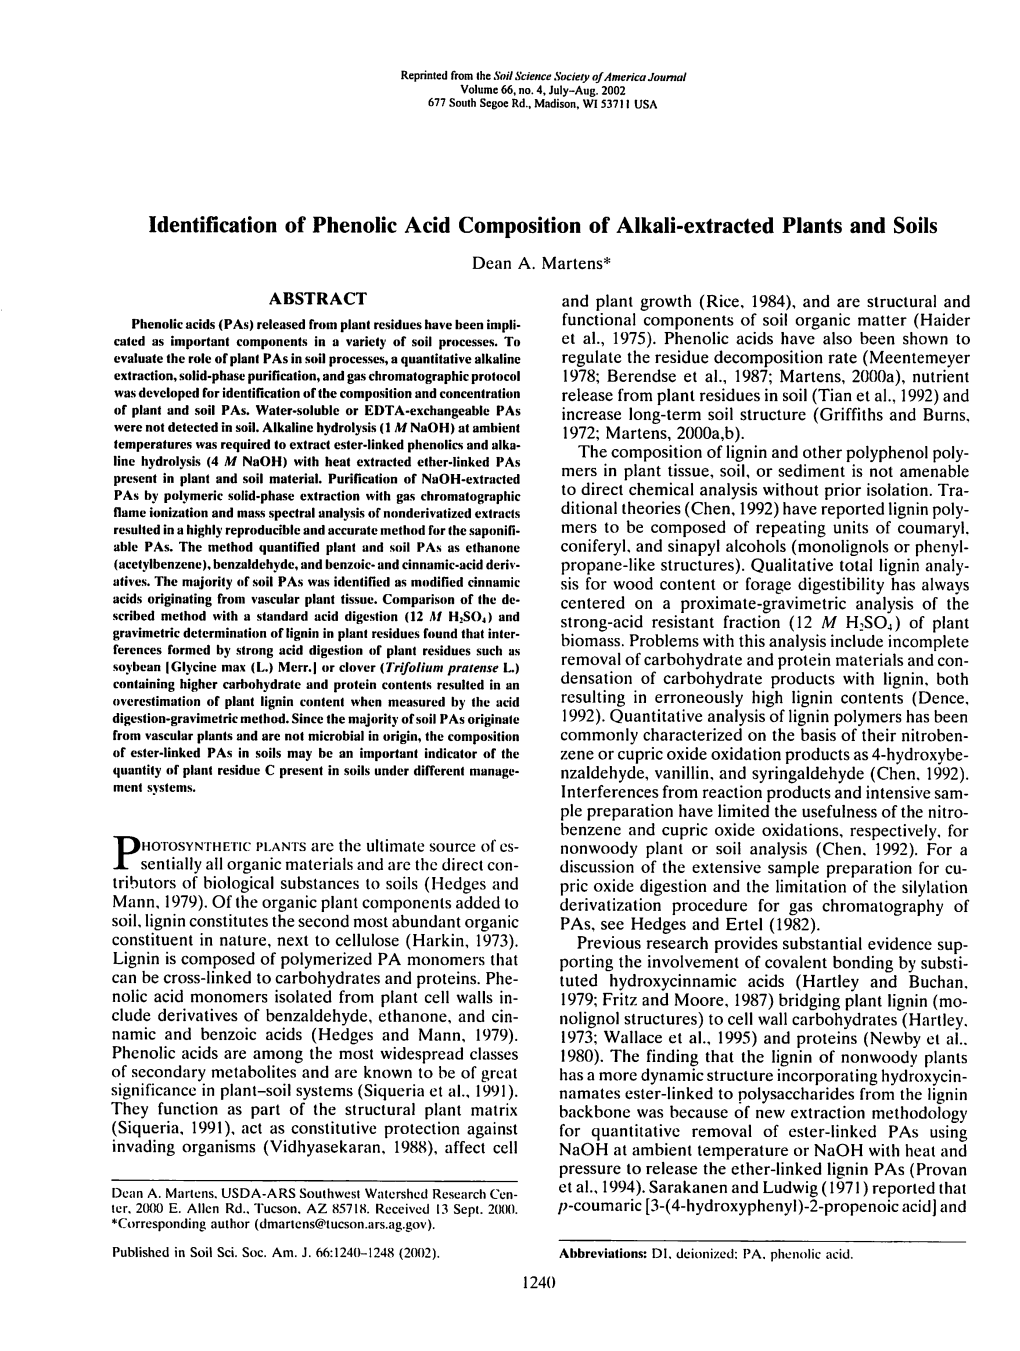 Identification of Phenolic Acid Composition of Alkali-Extracted Plants and Soils